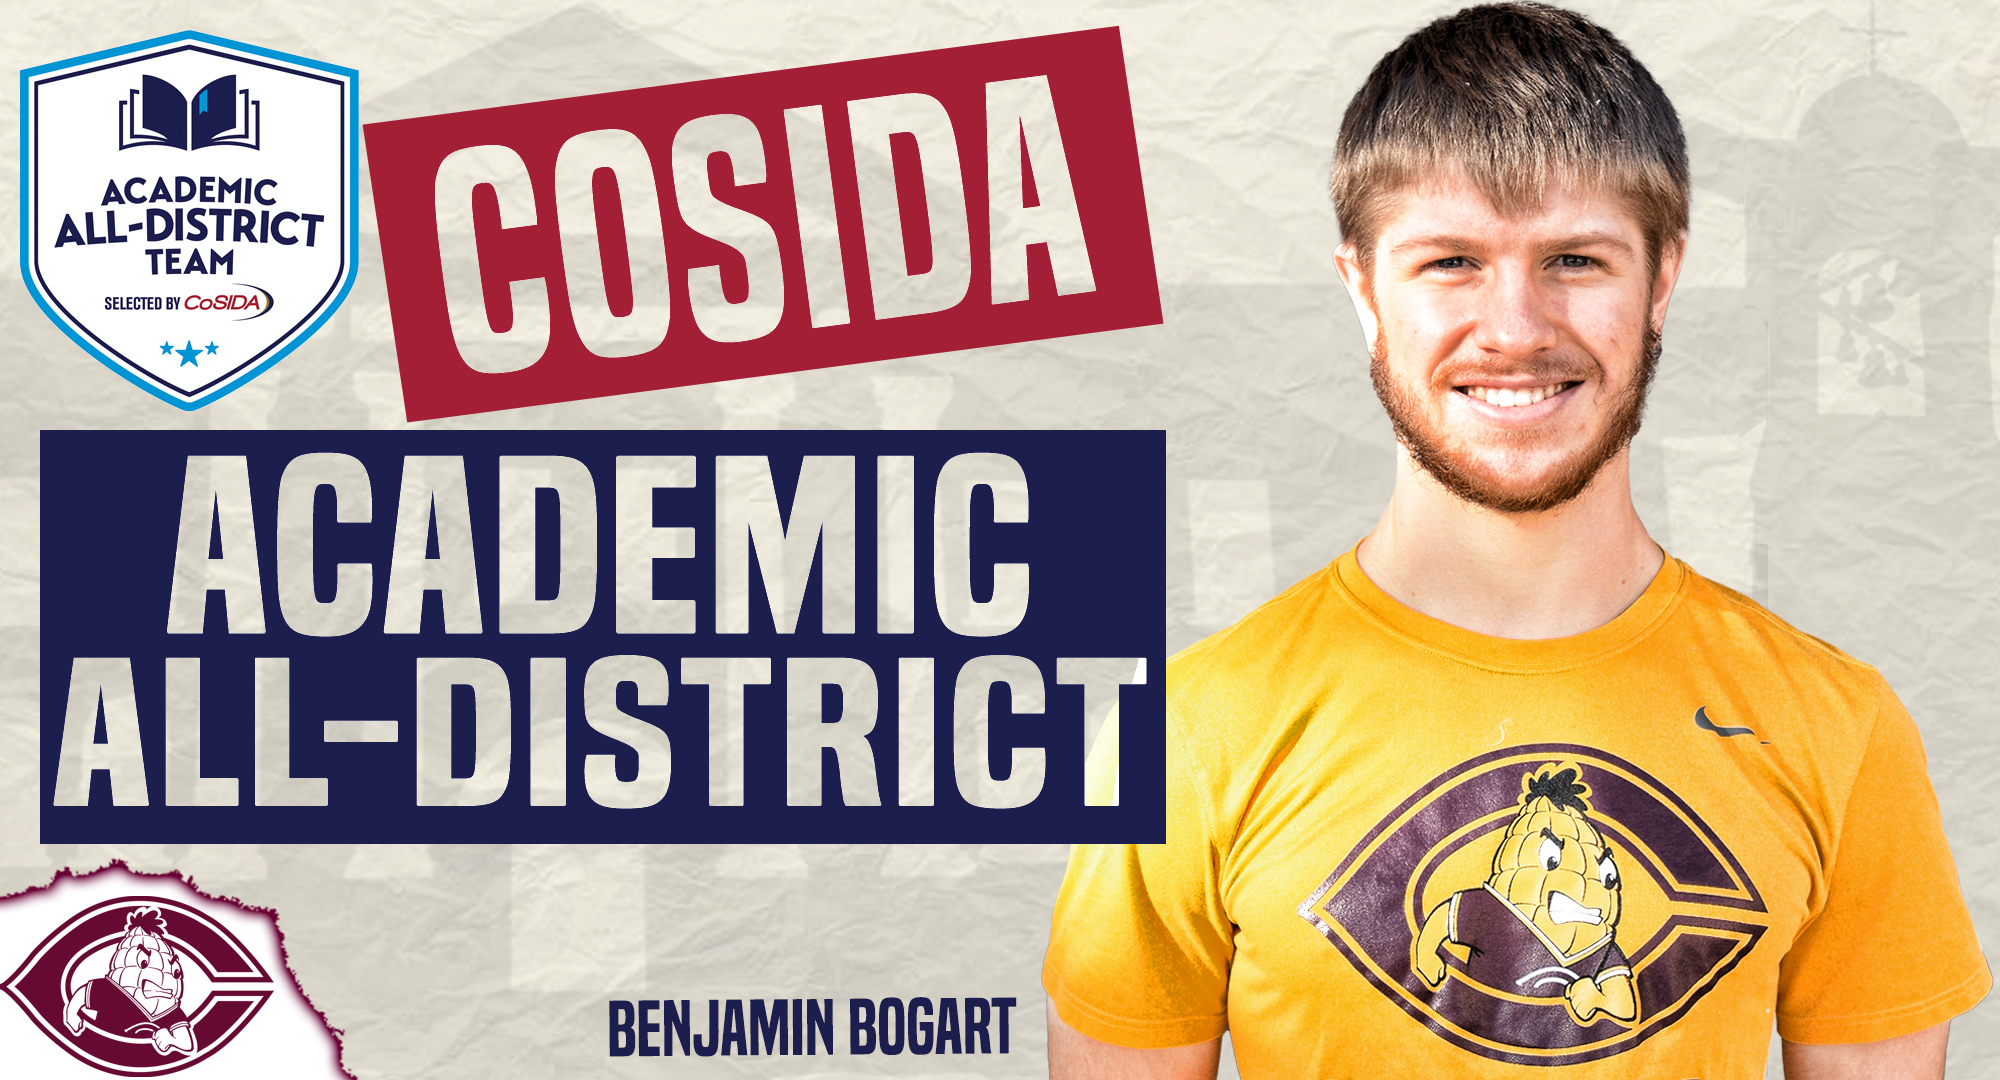 Concordia senior Benjamin Bogart was named to the CoSIDA Academic All-District At-Large Team. He had a 4.00 GPA while majoring in Physics and Mathematics.